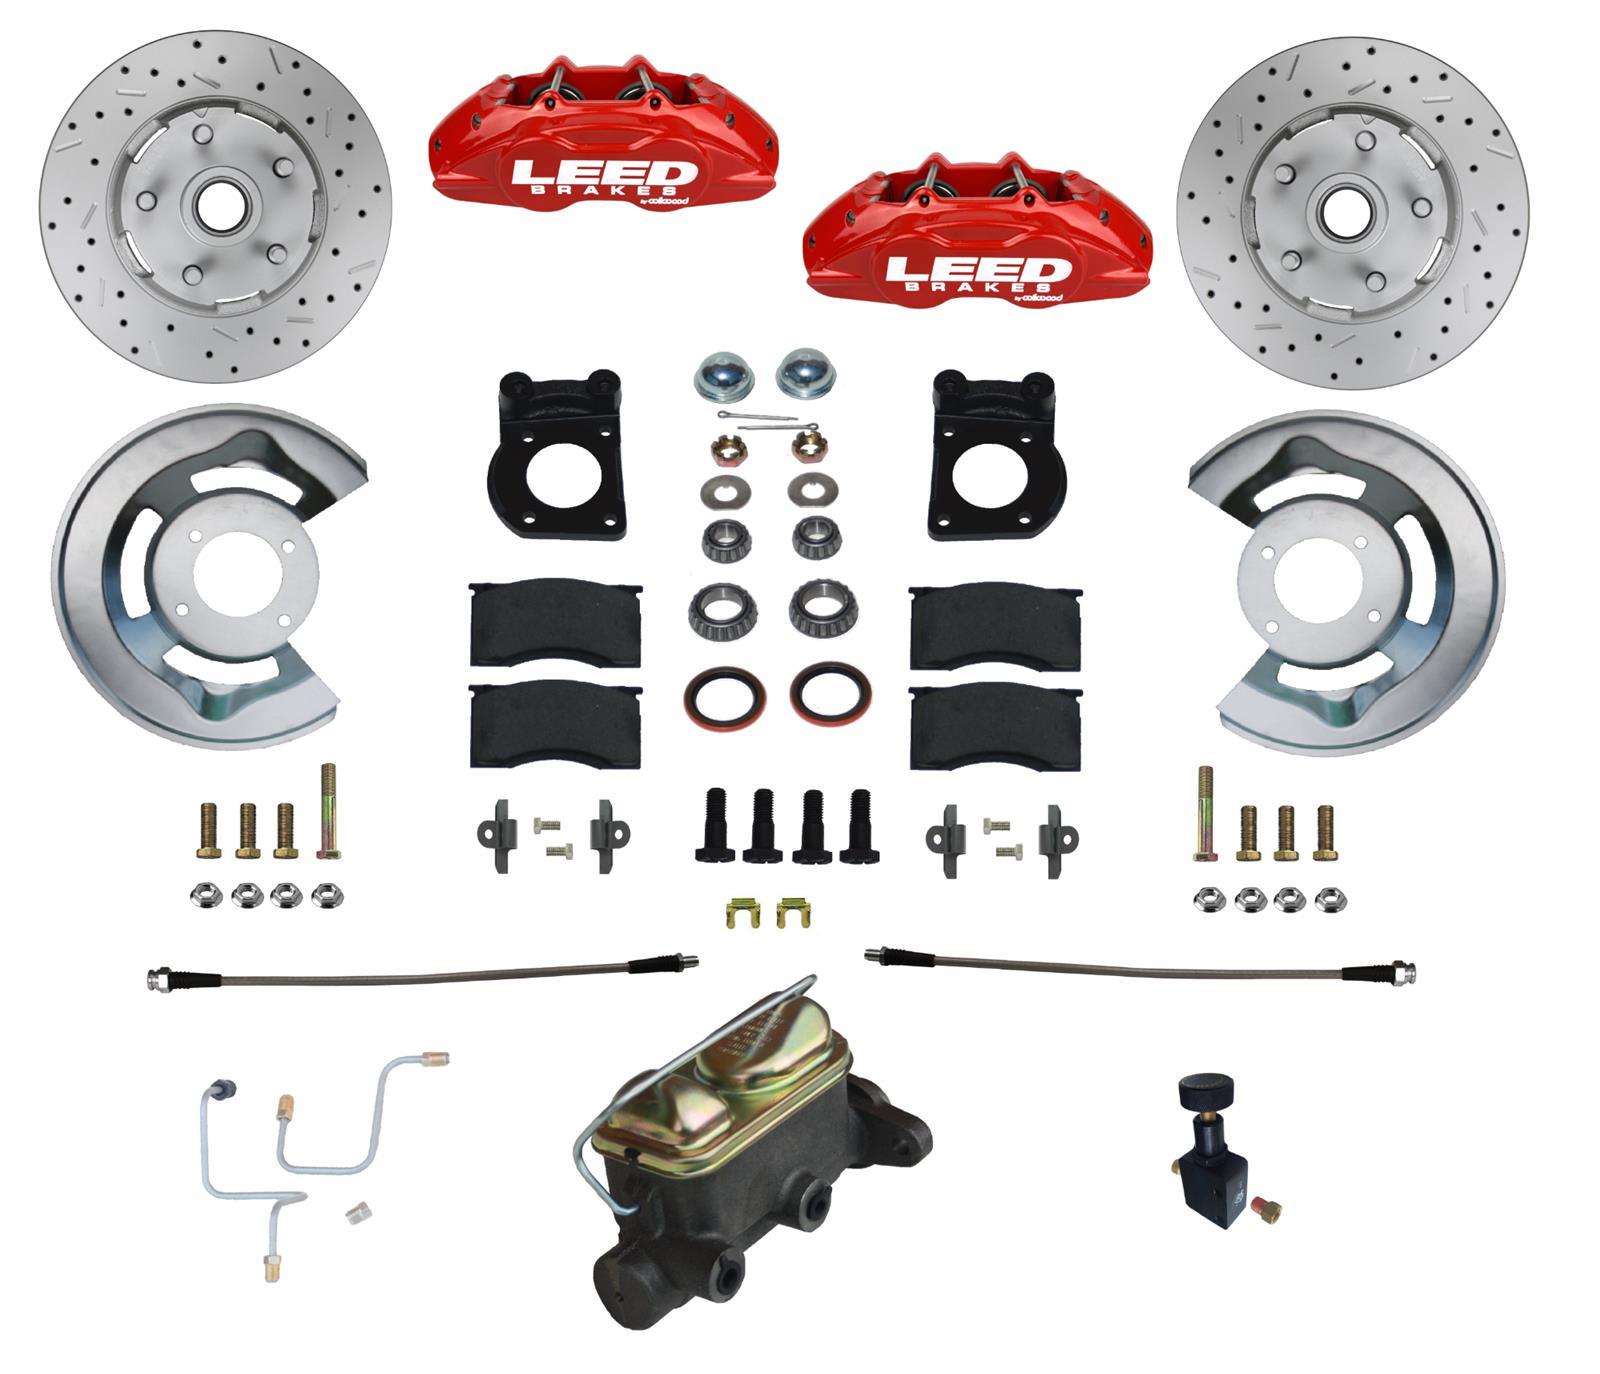 Leed Brakes RFC0005-405X Brake System, MaxGrip Lite, Front, 4 Piston Caliper, 11.33 in Drilled / Slotted Rotor, Pads / Calipers / Dust Cap / Backing Plates / Master Cylinder / Proportioning Valve, Aluminum, Red Powder Coat, Ford Mustang 1965-66, Kit